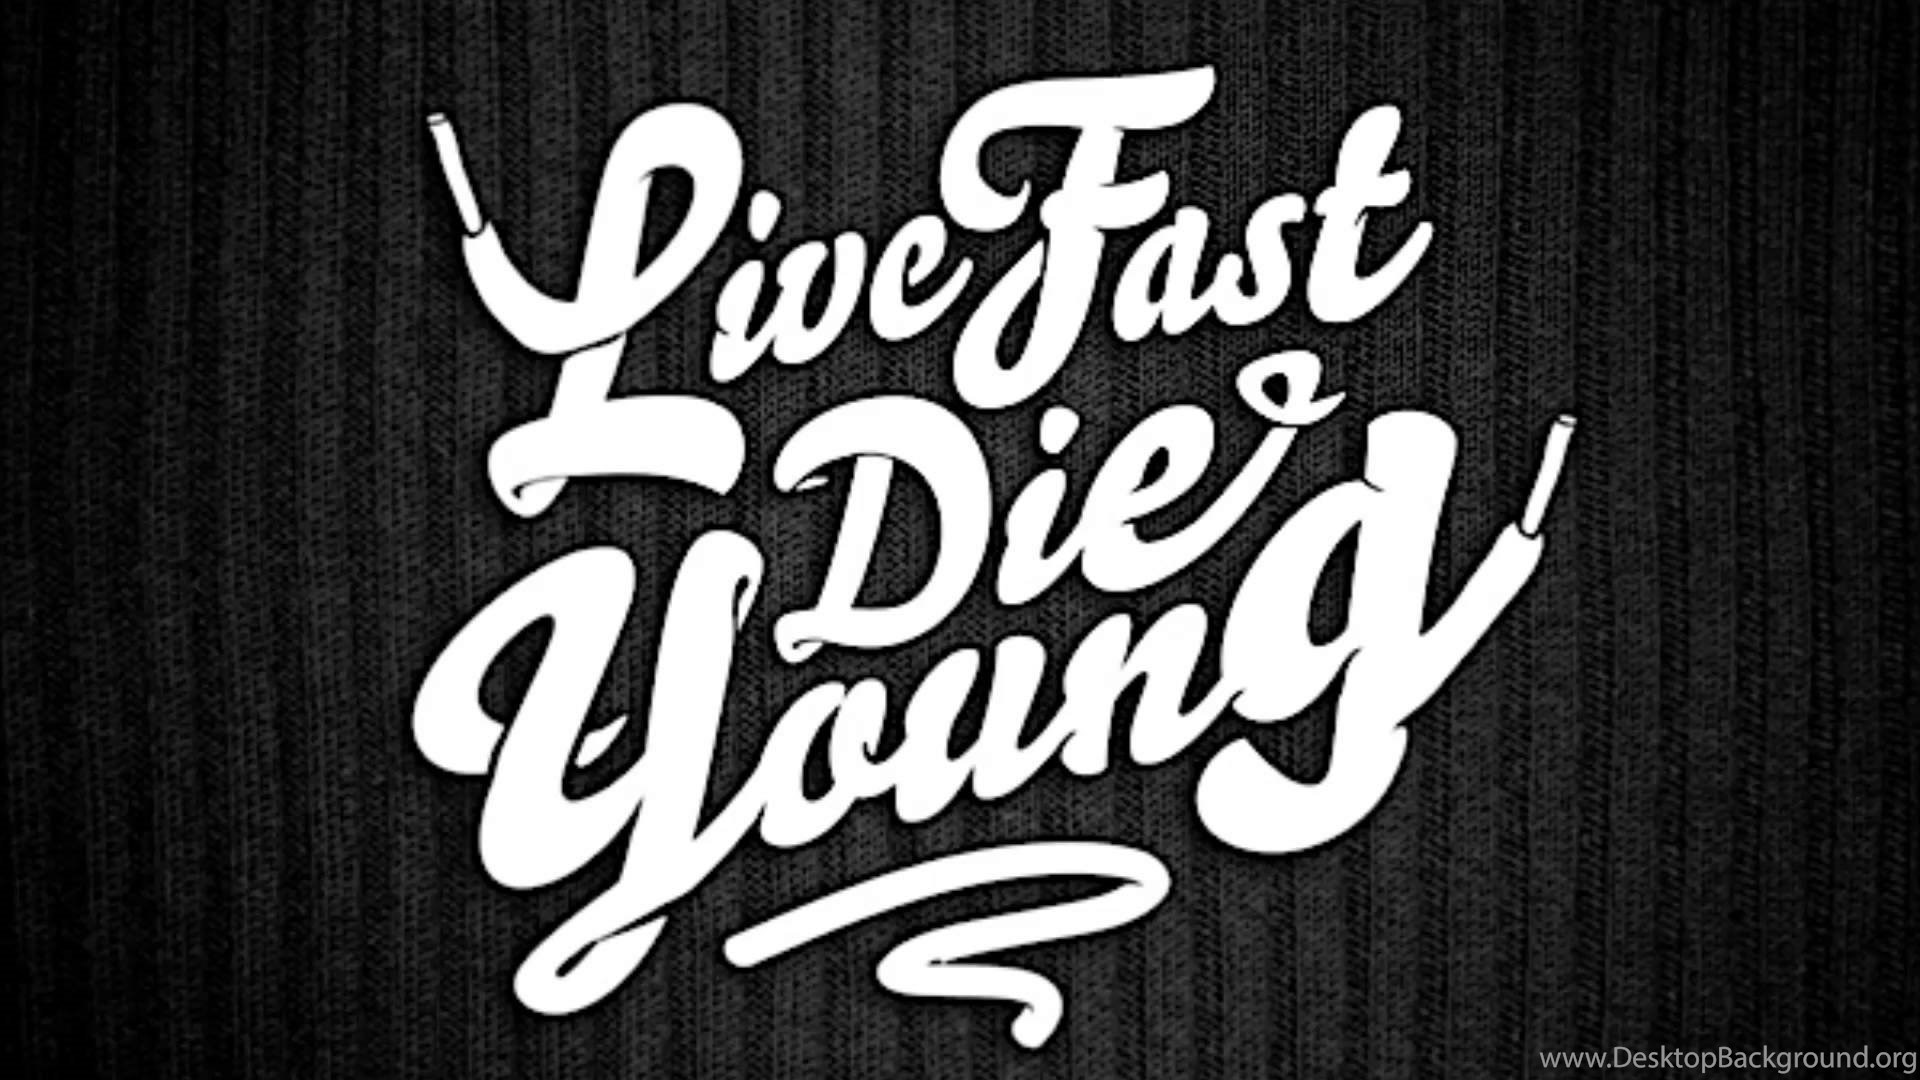 Life die young. Каллиграфия фон. Gang обои. Live fast die young. Fast надпись.